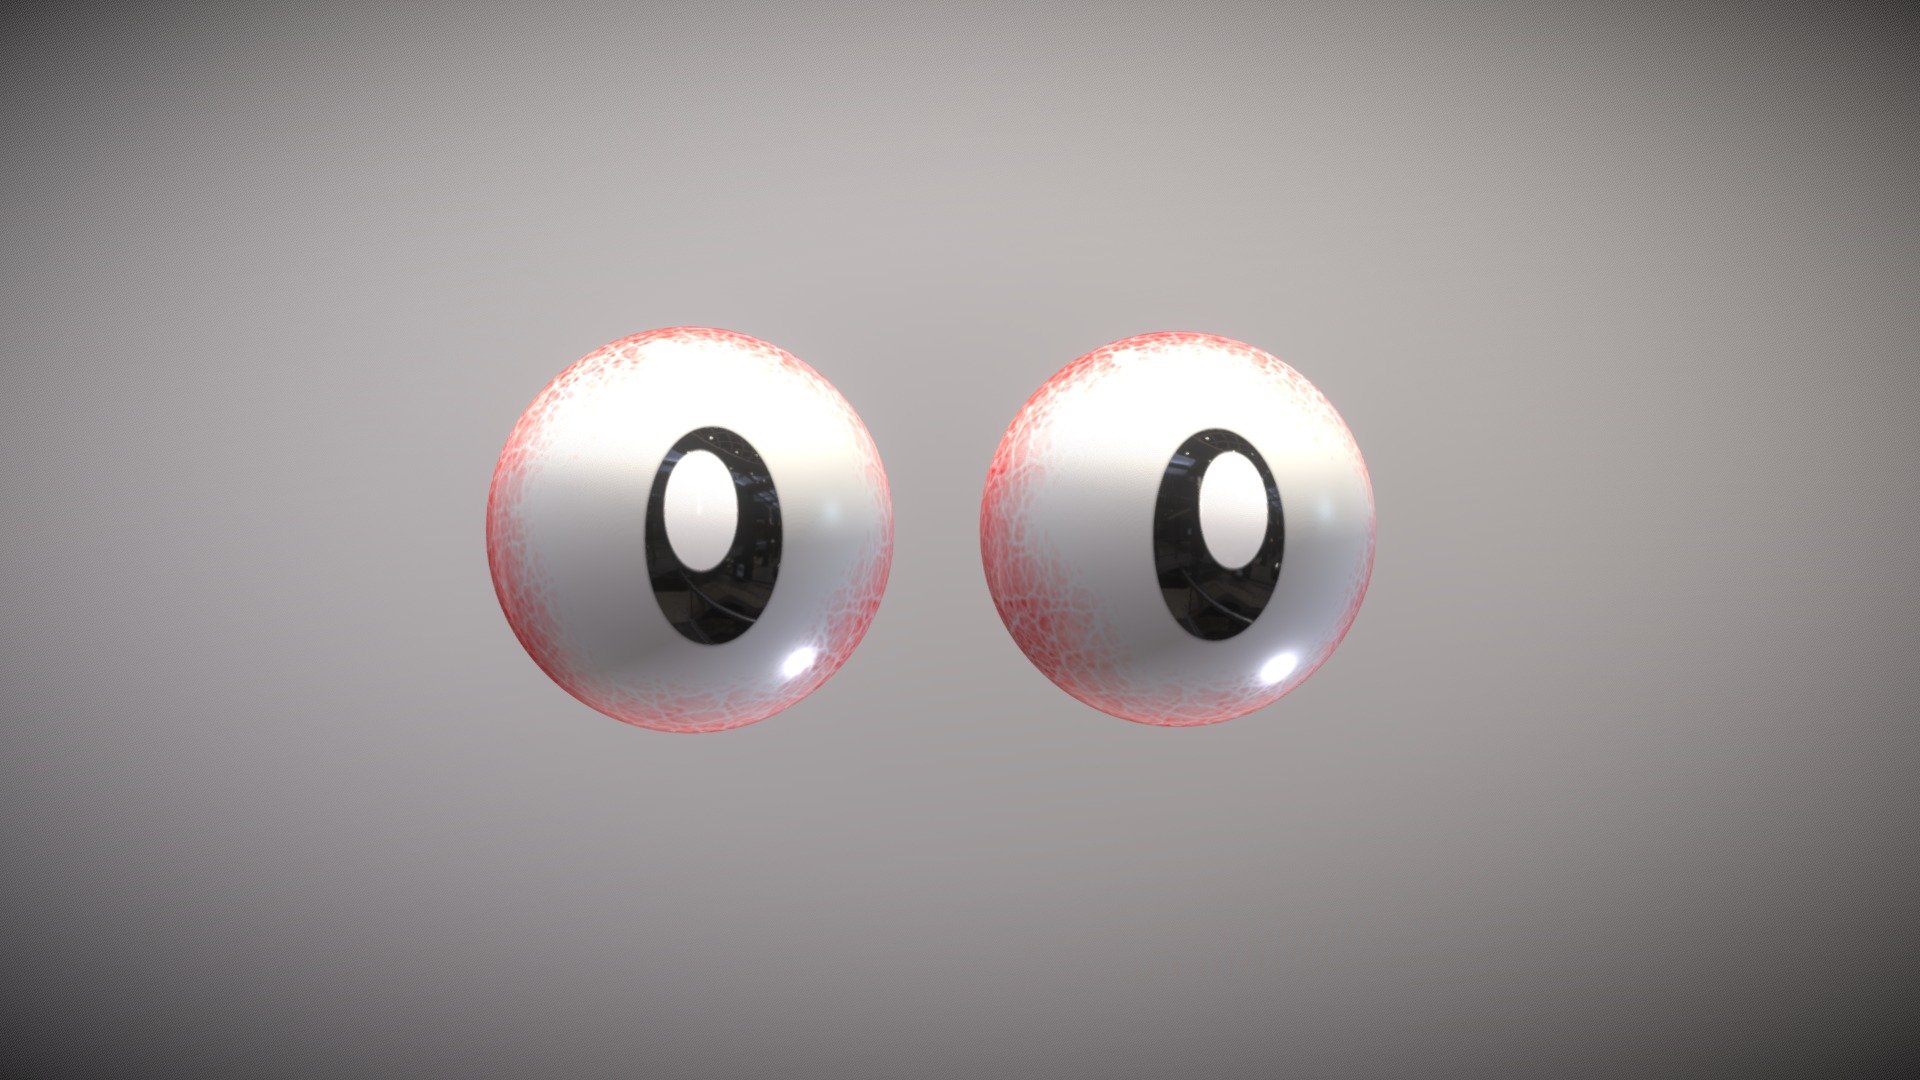 WARNING: Check poly count. This is not a gaming asset.
Here are some cartoon eyes that I think look pretty epic. 
They are VERY high poly so be warned. 
Textures are 2k.

Enjoy and feel free to use for anything you'd like as I keep pumping out assests on here for free 3d model